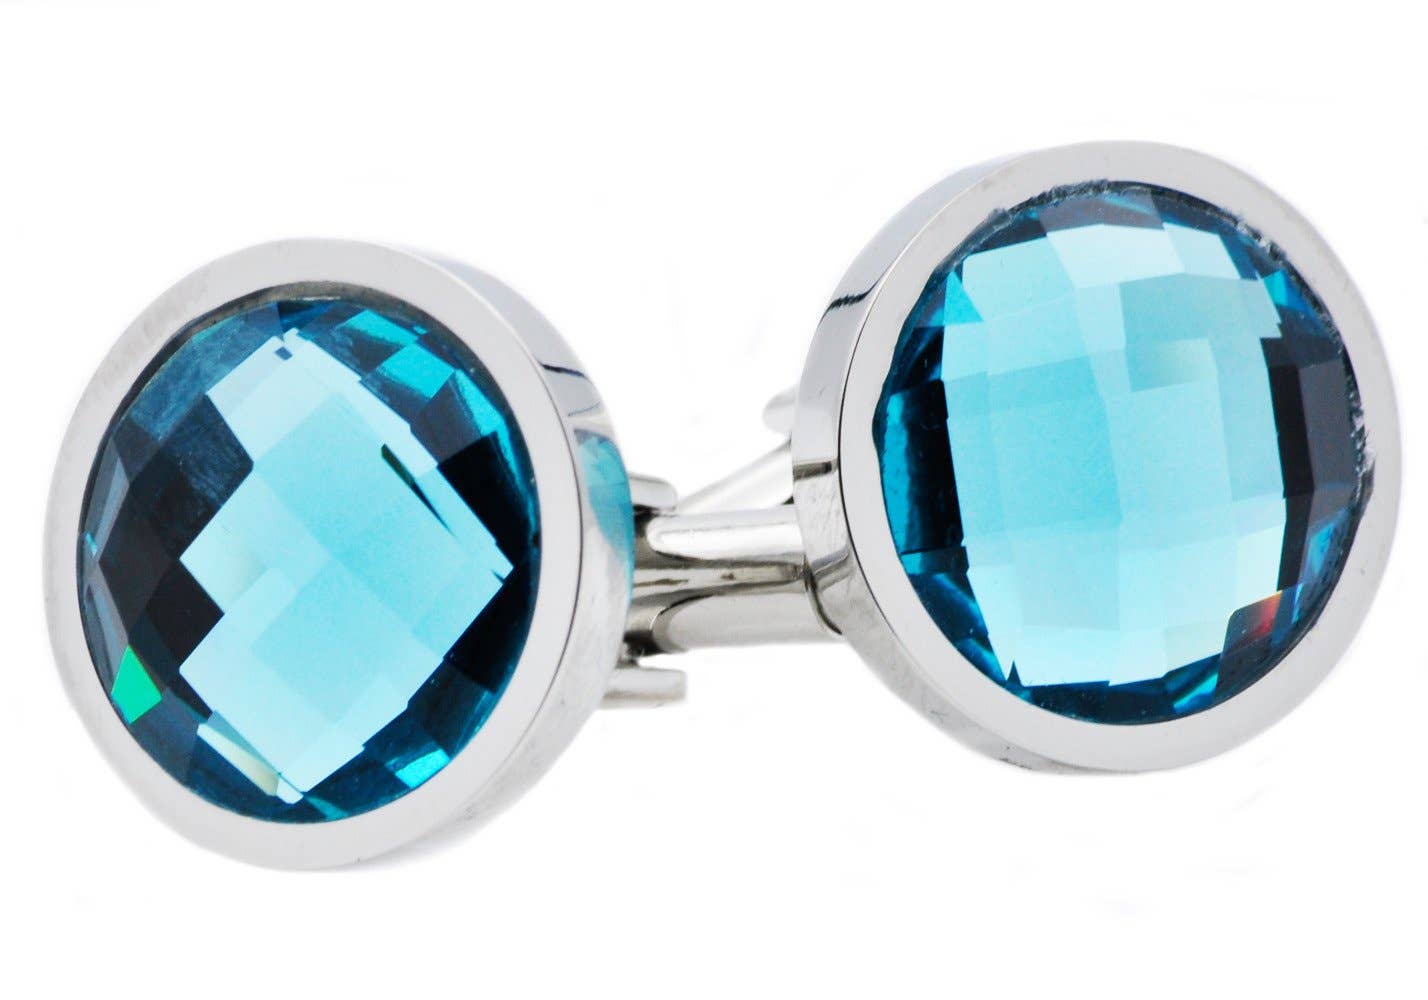 Blackjack Mens Jewelry - Mens  Cuff Links With Blue Crystals